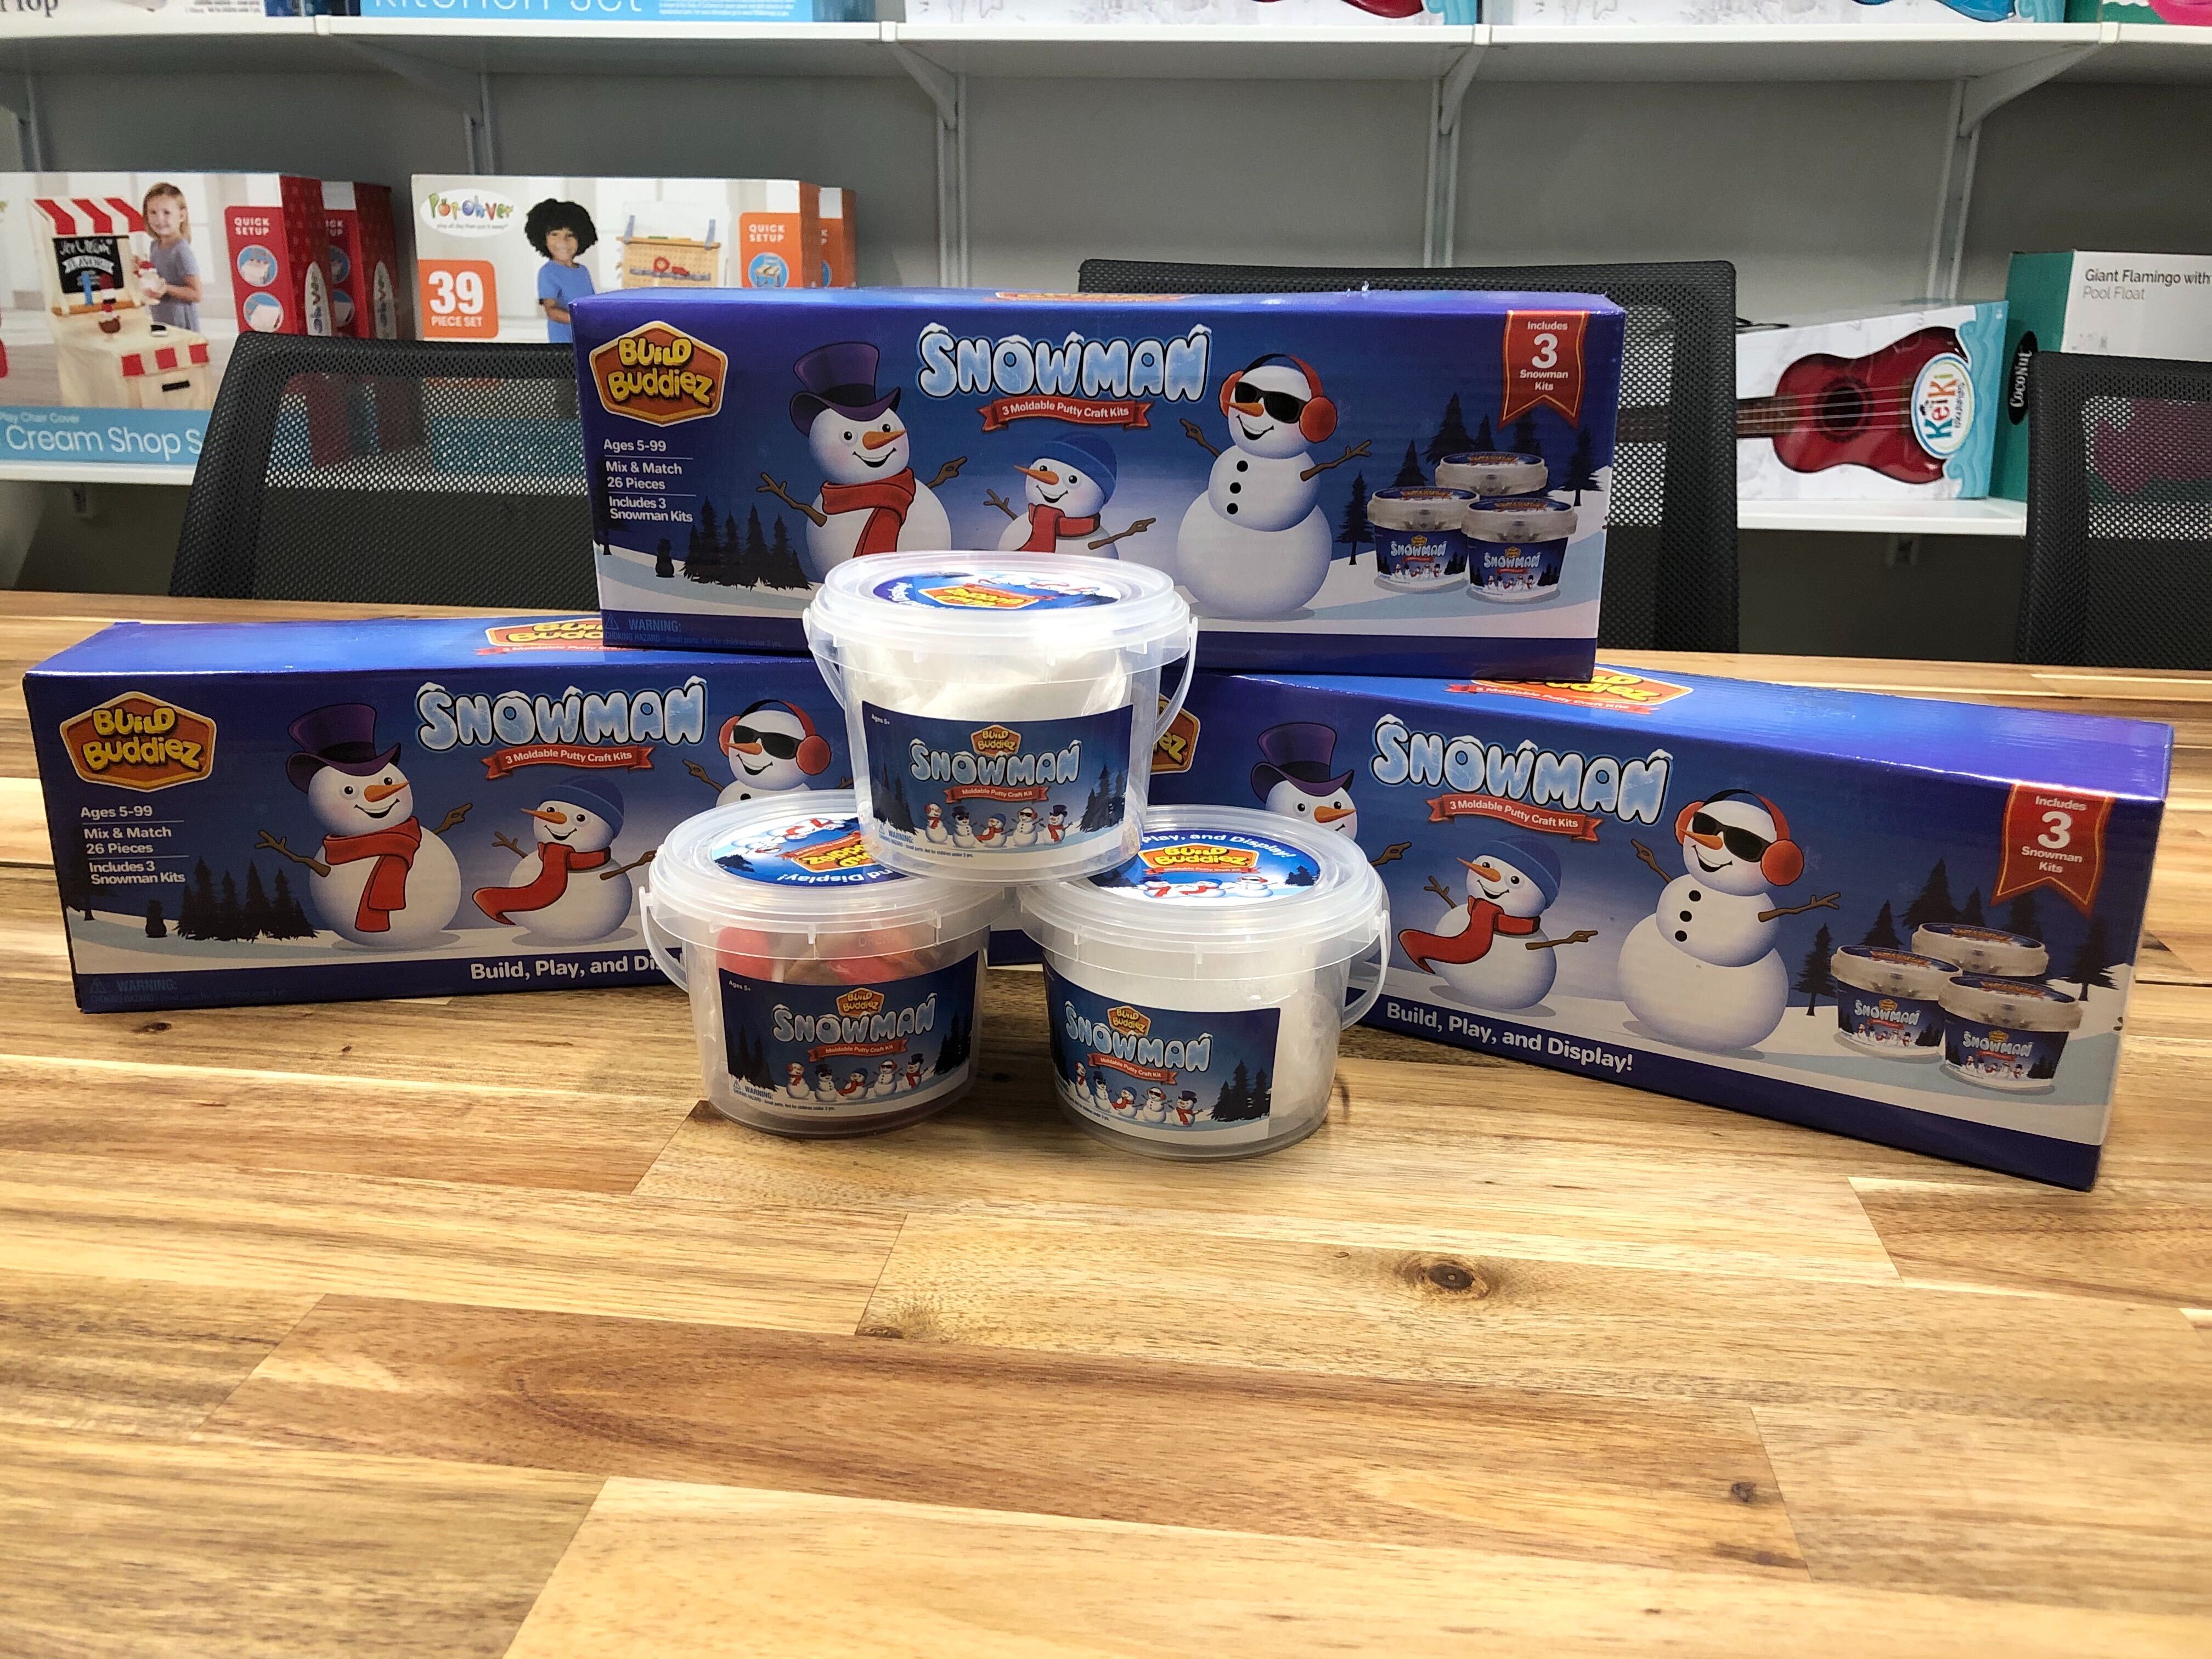 Play Build Build Buddiez Snowman Craft Kit 3 Pack and Display 3 Putty Snowmen All Christmas & Winter 